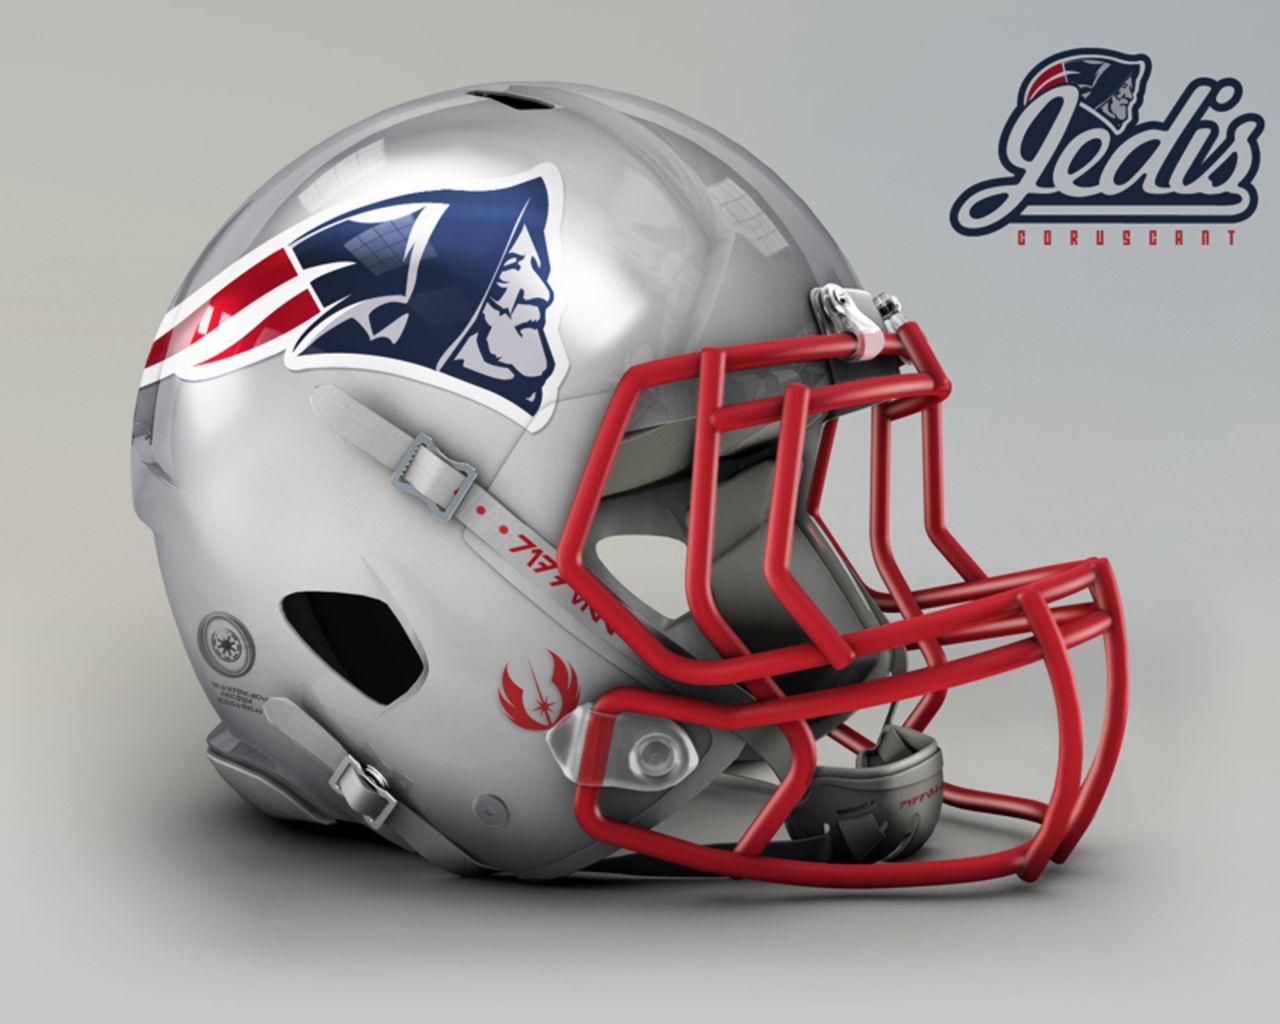 The most successful football franchise of the last decade, the <a href="http://www.patriots.com/" target="_blank" target="_blank">New England Patriots</a>, maintain their Stars & Stripes color code and become Jedis. The hooded one portrayed on the helmet is Obi-Wan Kenobi, but to Patriots fans it could well be coach Bill Belichick.